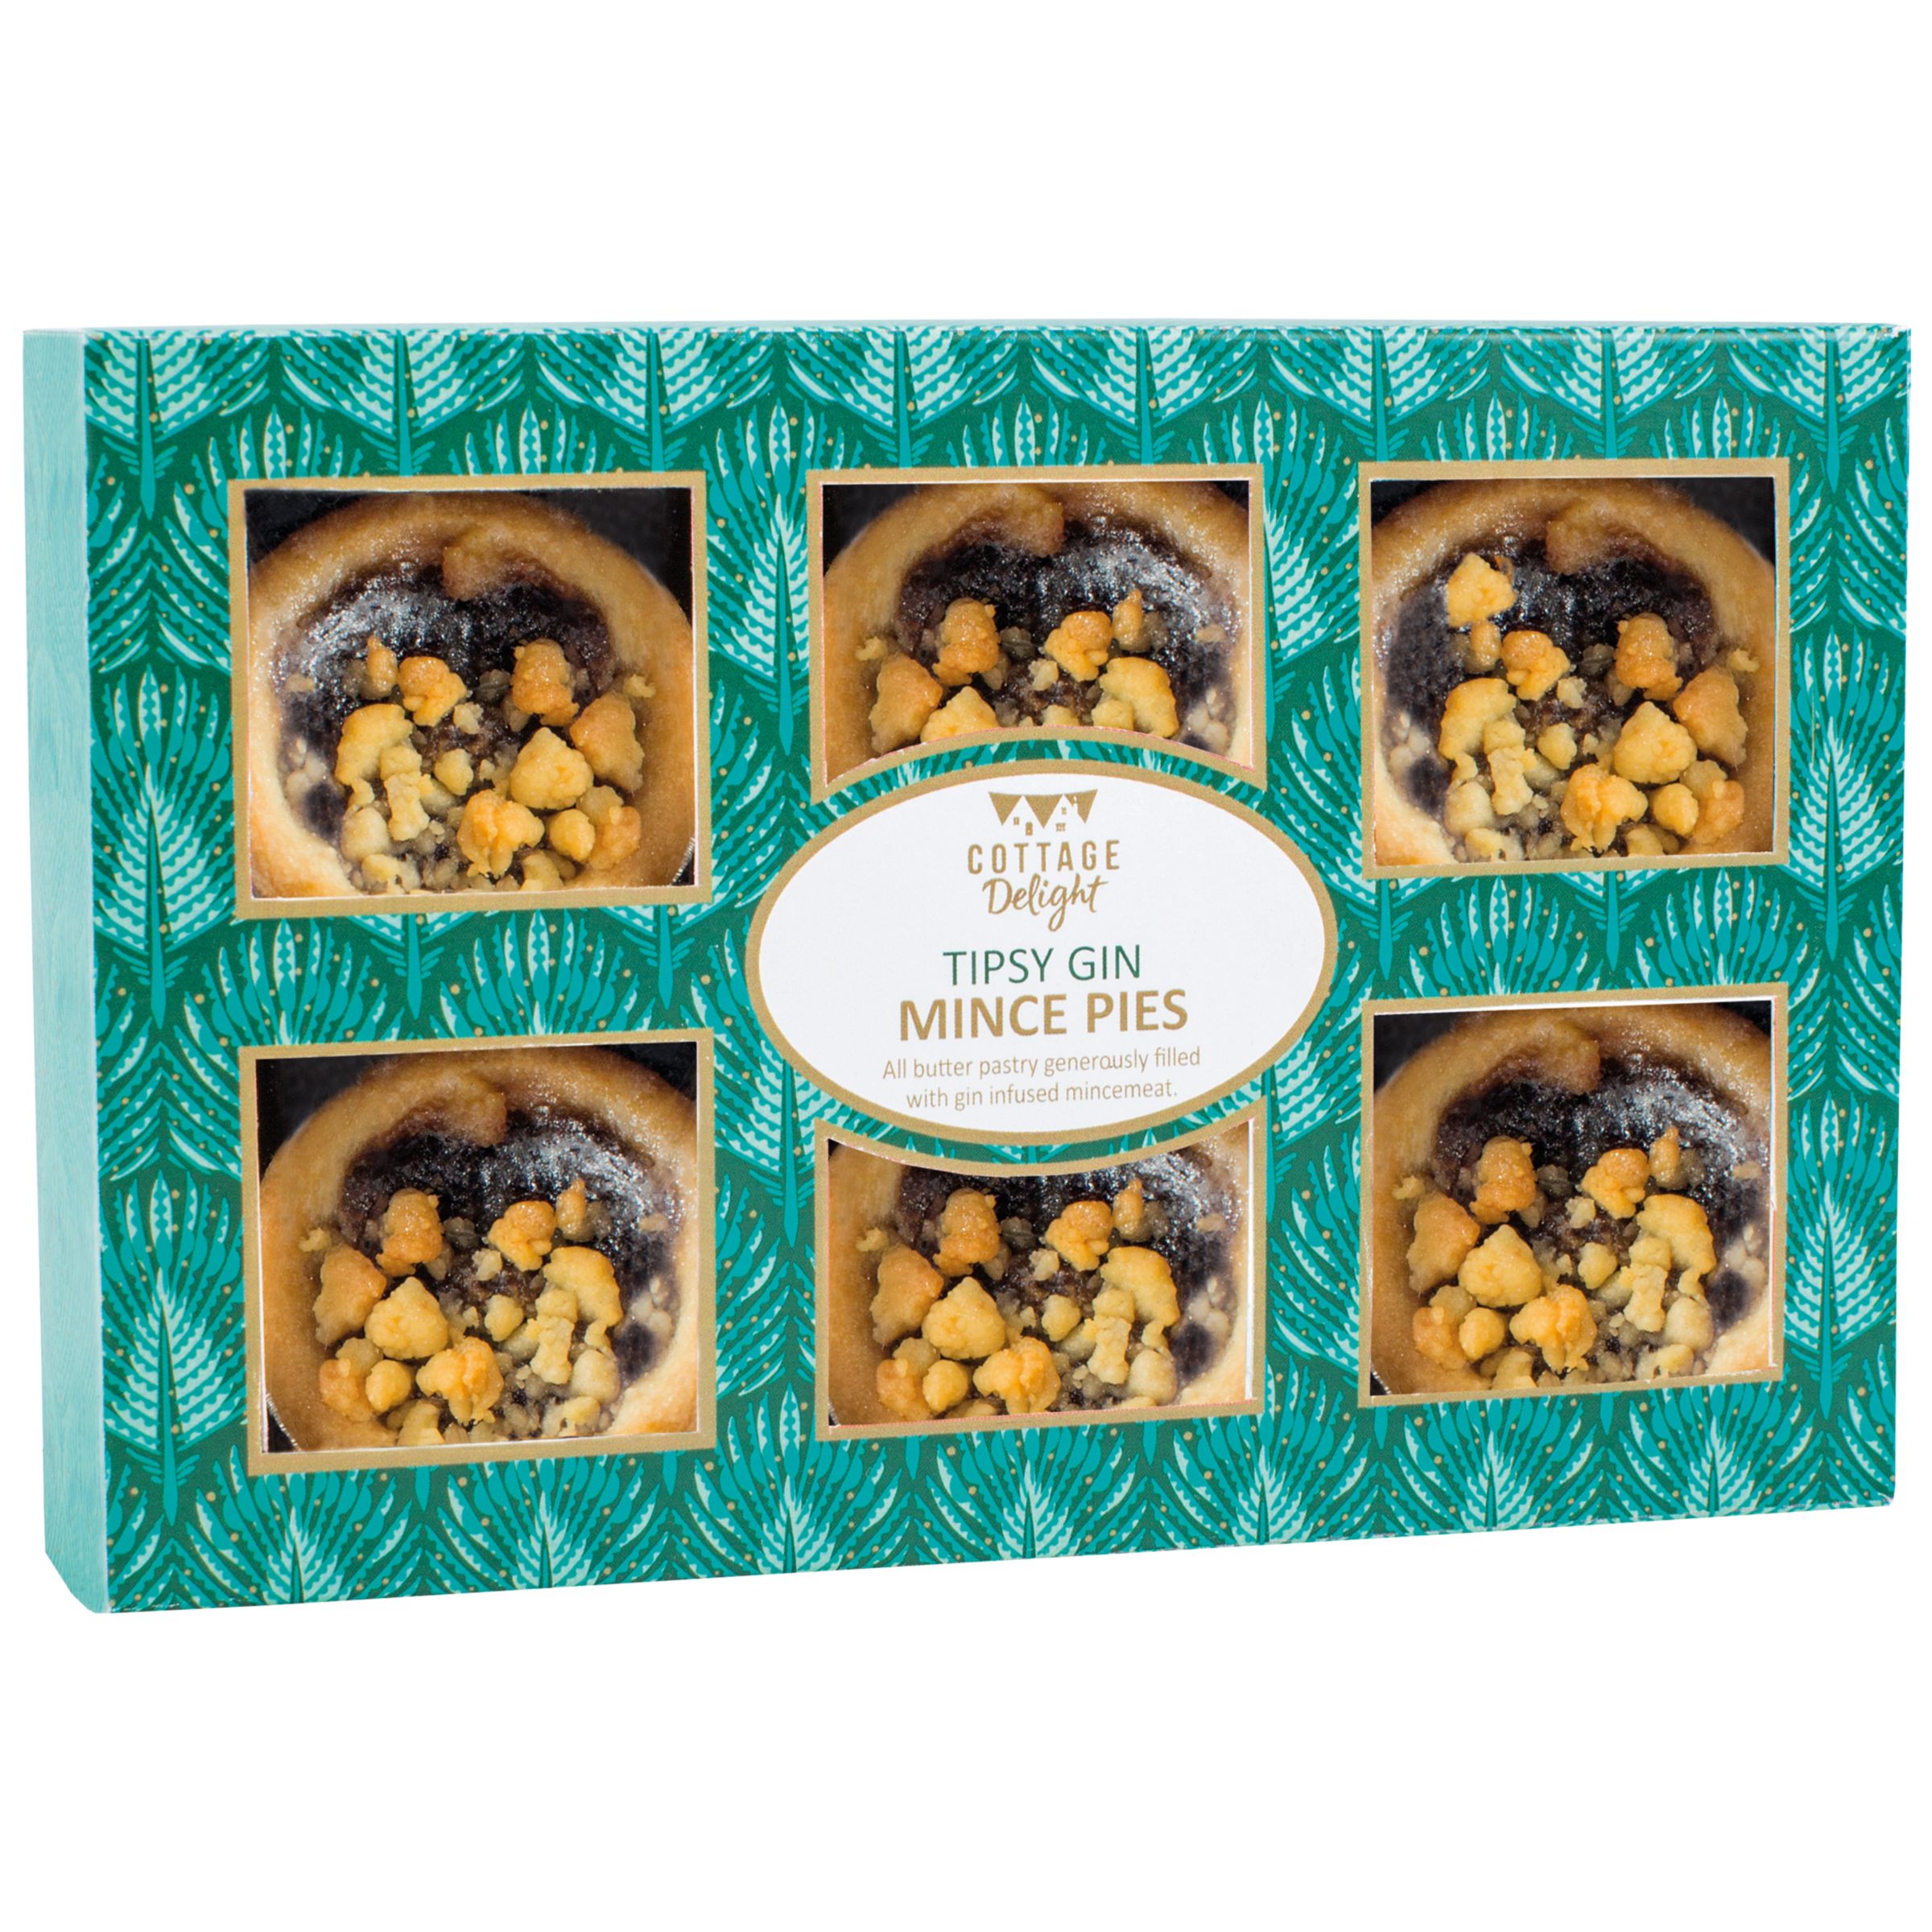 Cottage Delight Tipsy Gin Mince Pies Pack Of 6 220g At John